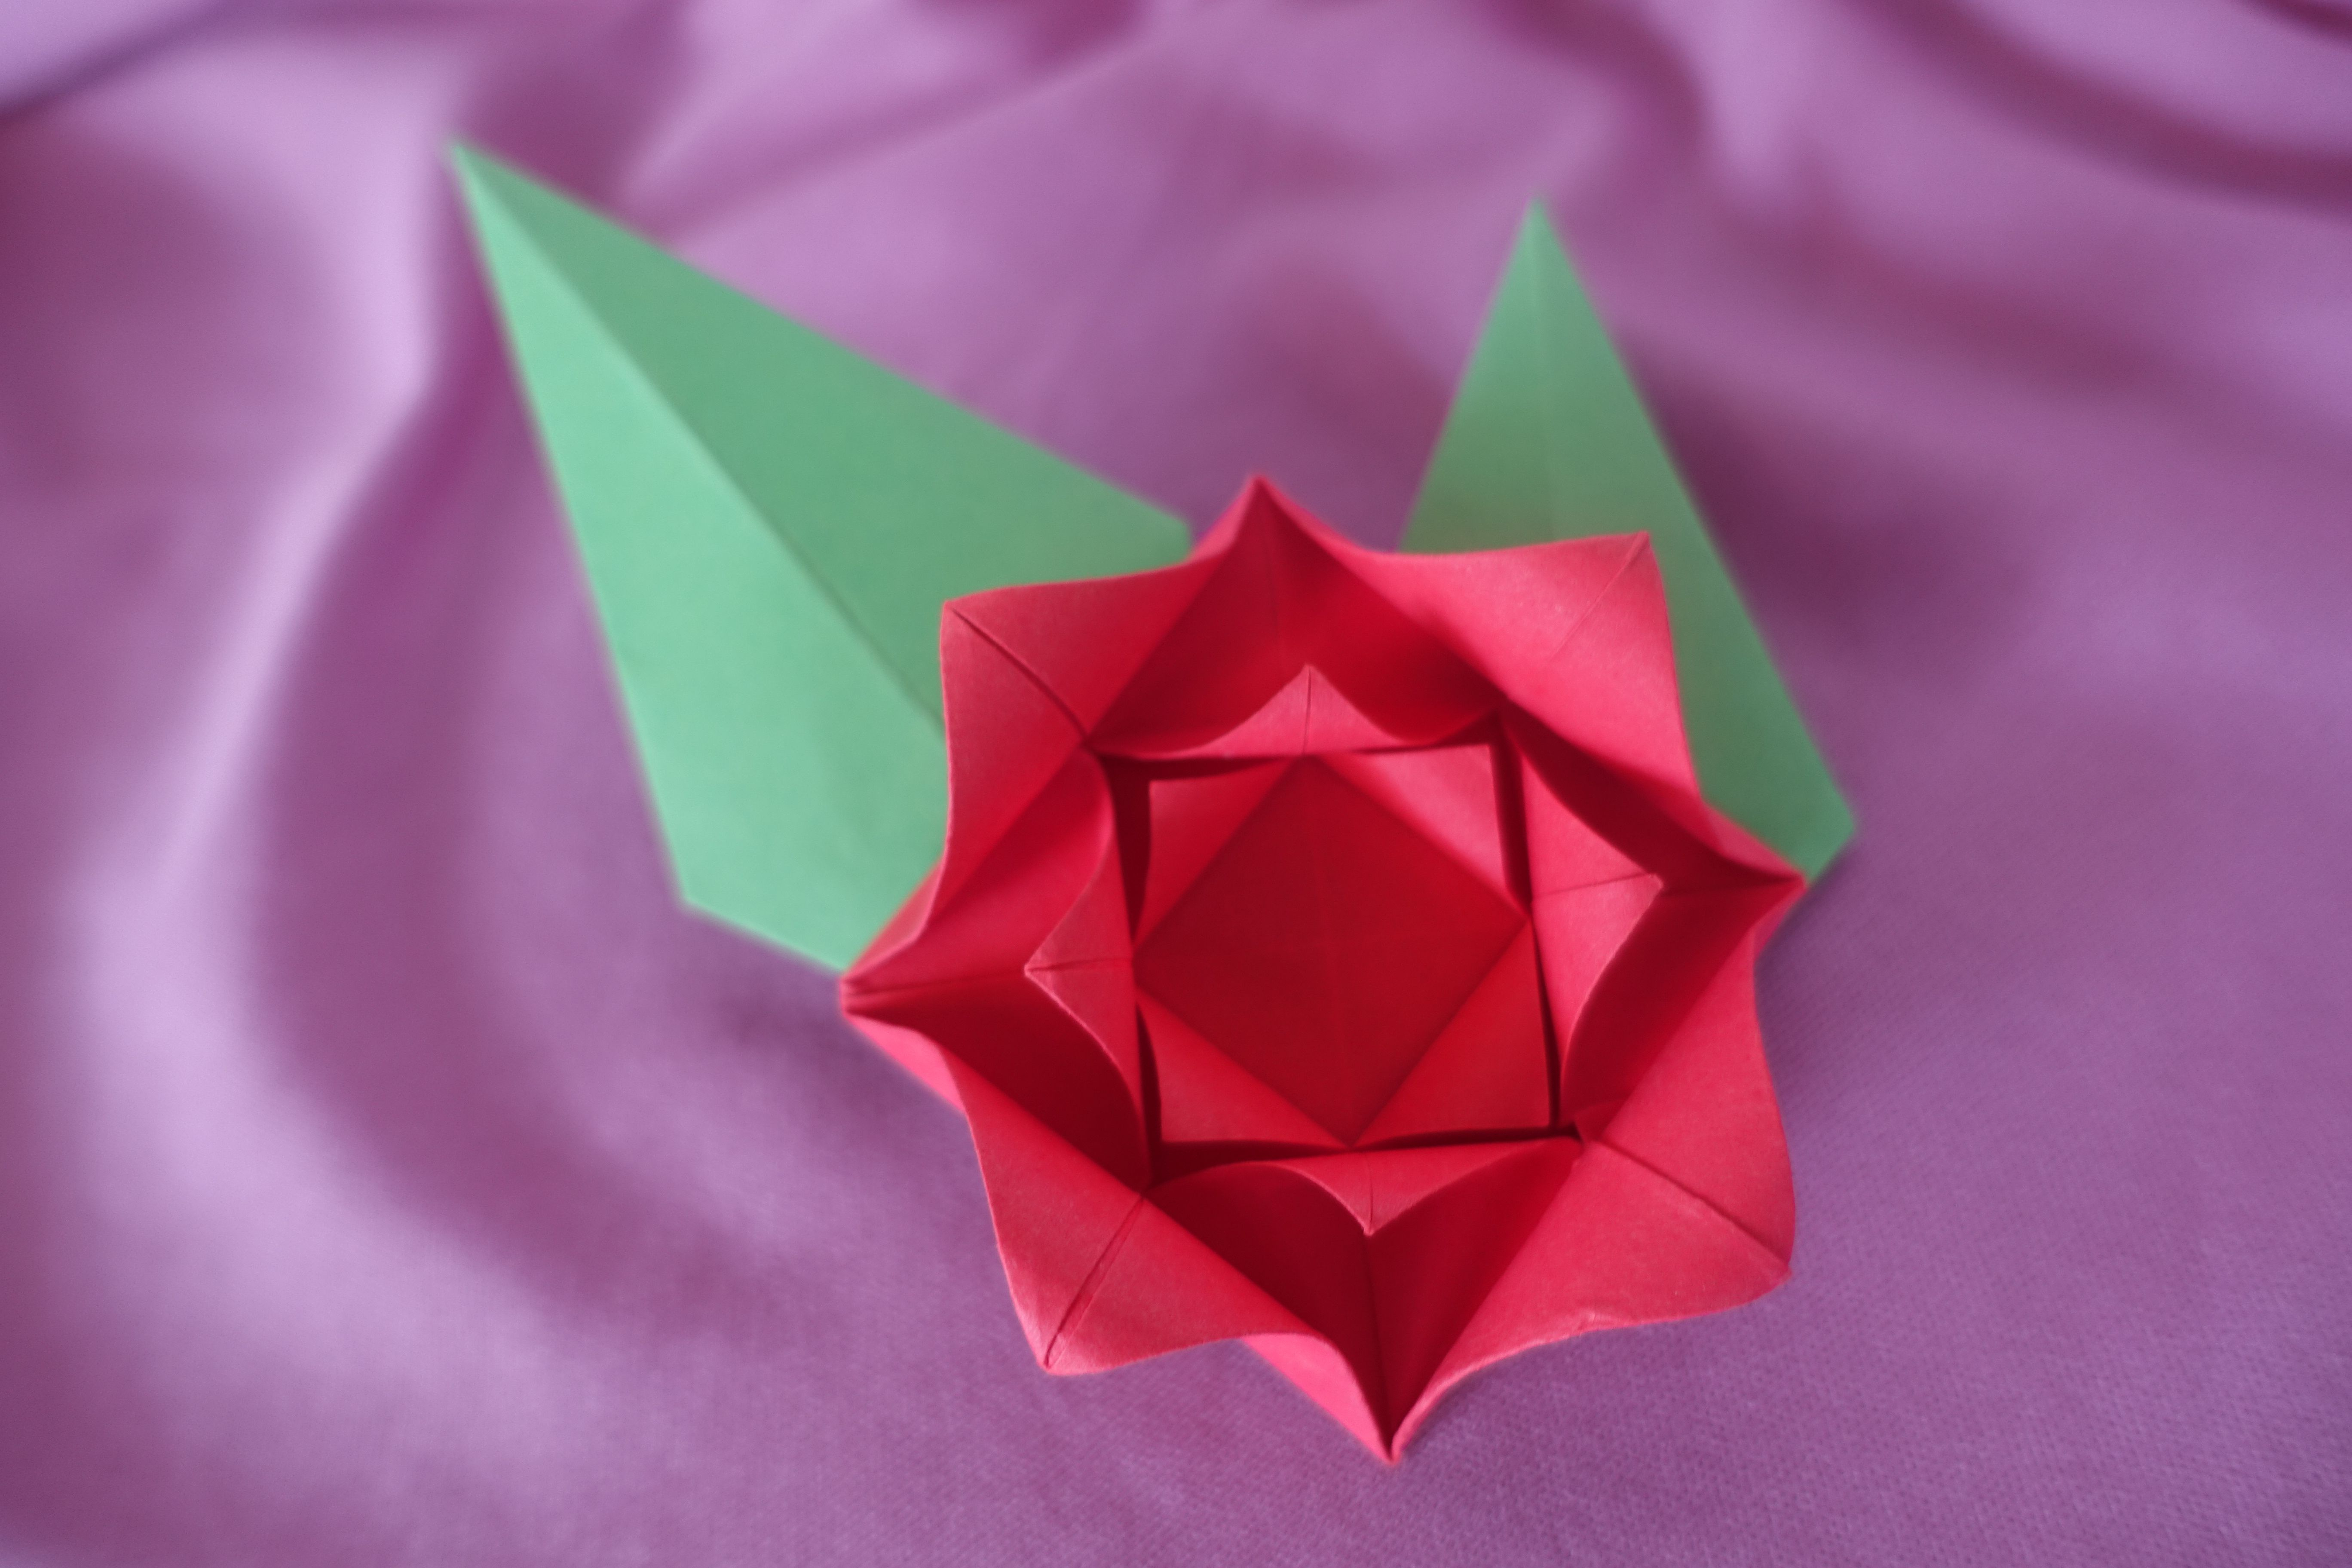 How To Make Flowers With Origami Make An Easy Origami Rose